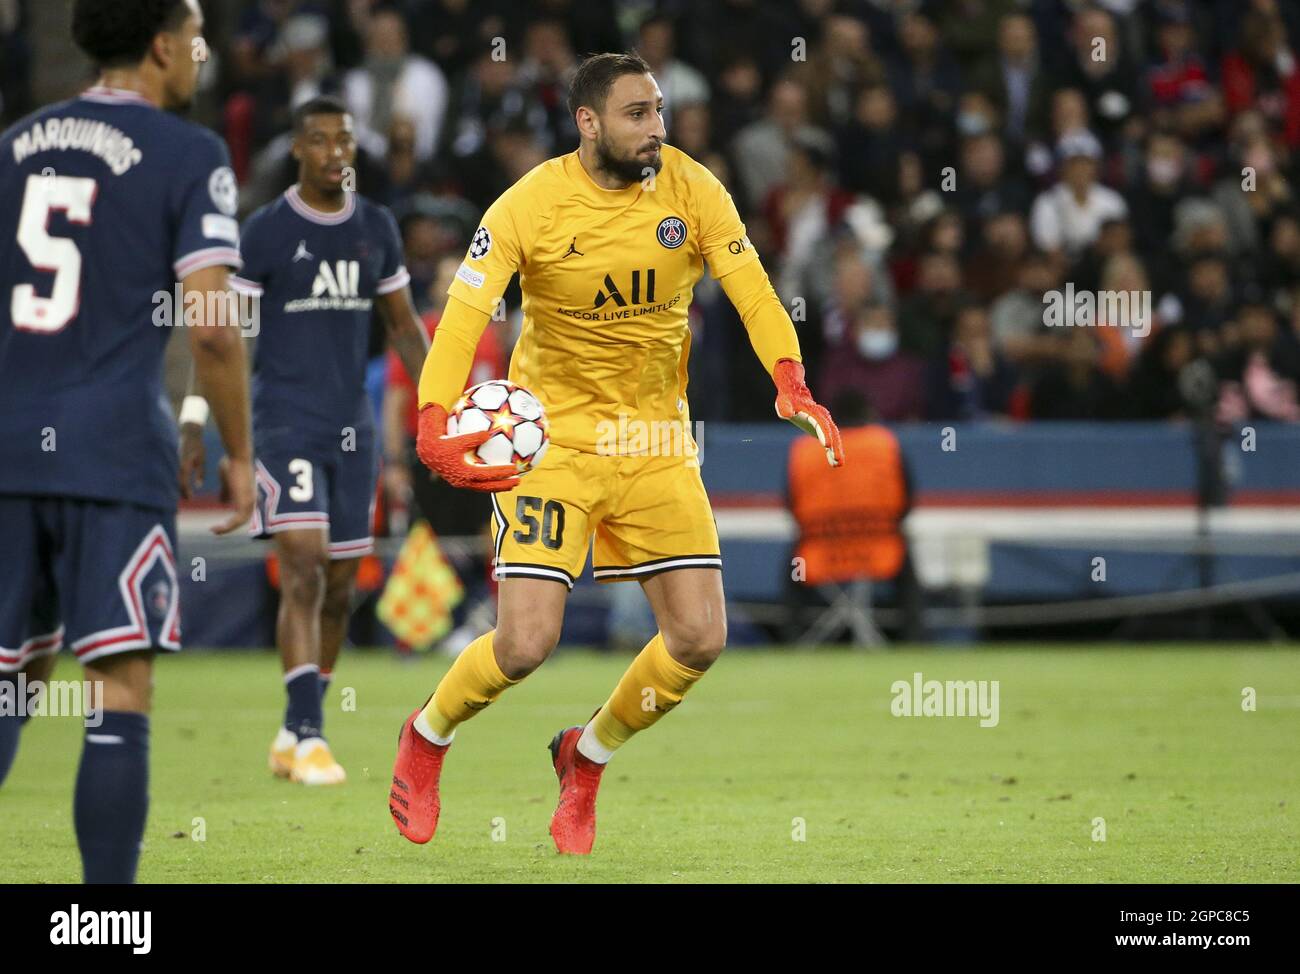 Paris, France. 28th Sep, 2021. Goalkeeper of PSG Gianluigi Donnarumma  during the UEFA Champions League, Group A football match between Paris Saint -Germain and Manchester City on September 28, 2021 at Parc des